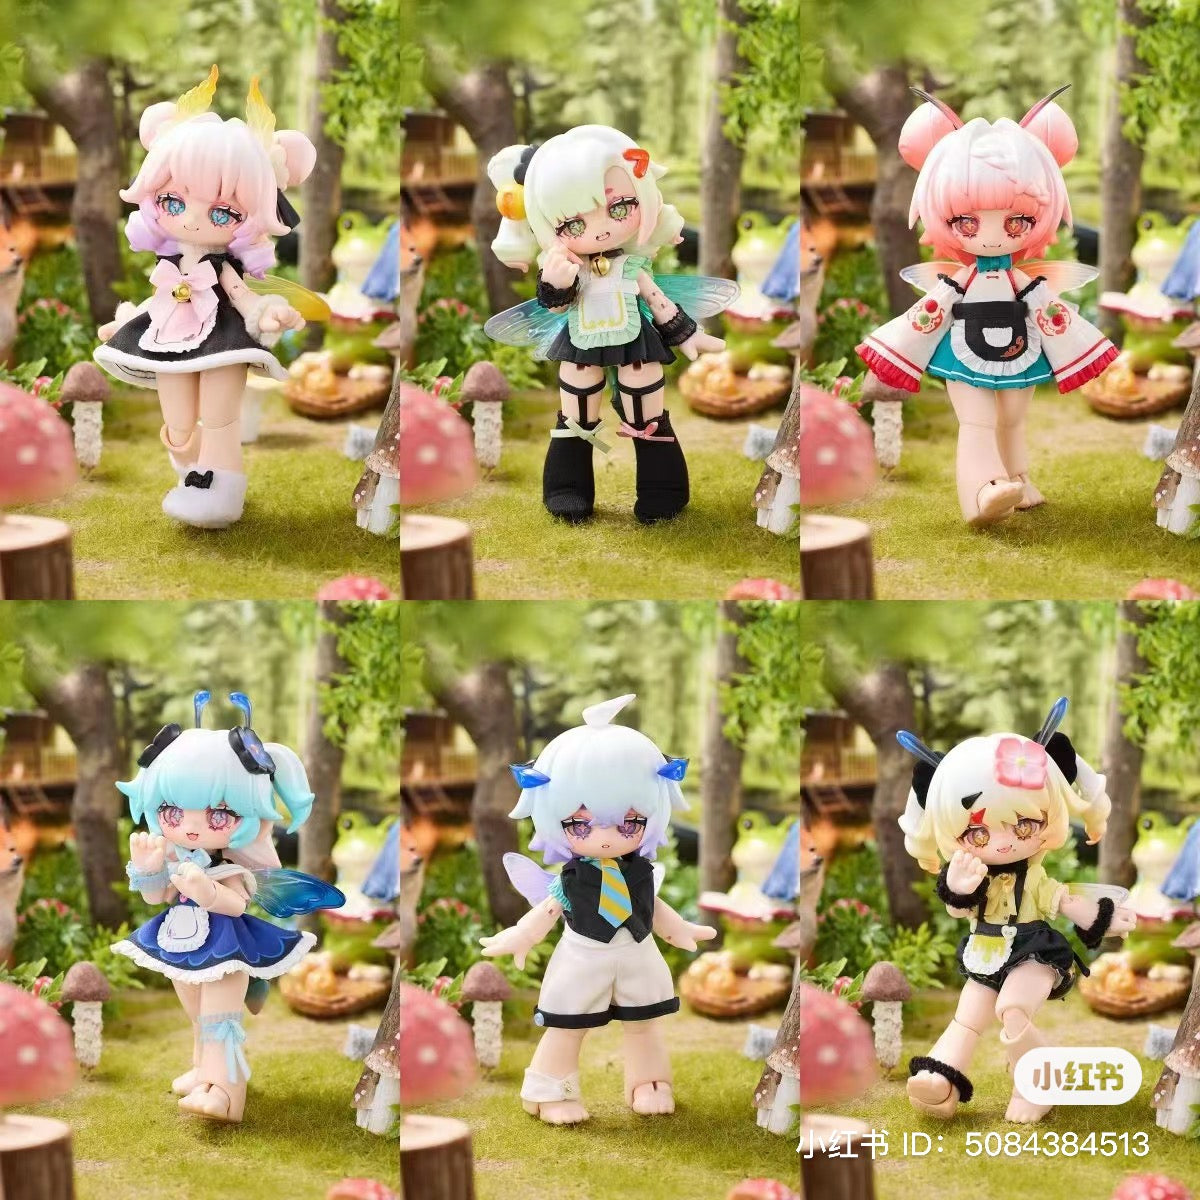 A collage of toy figures from Kukaka Insect Cafe BJD Blind Box Series, featuring fairy, doll with wings, and more.